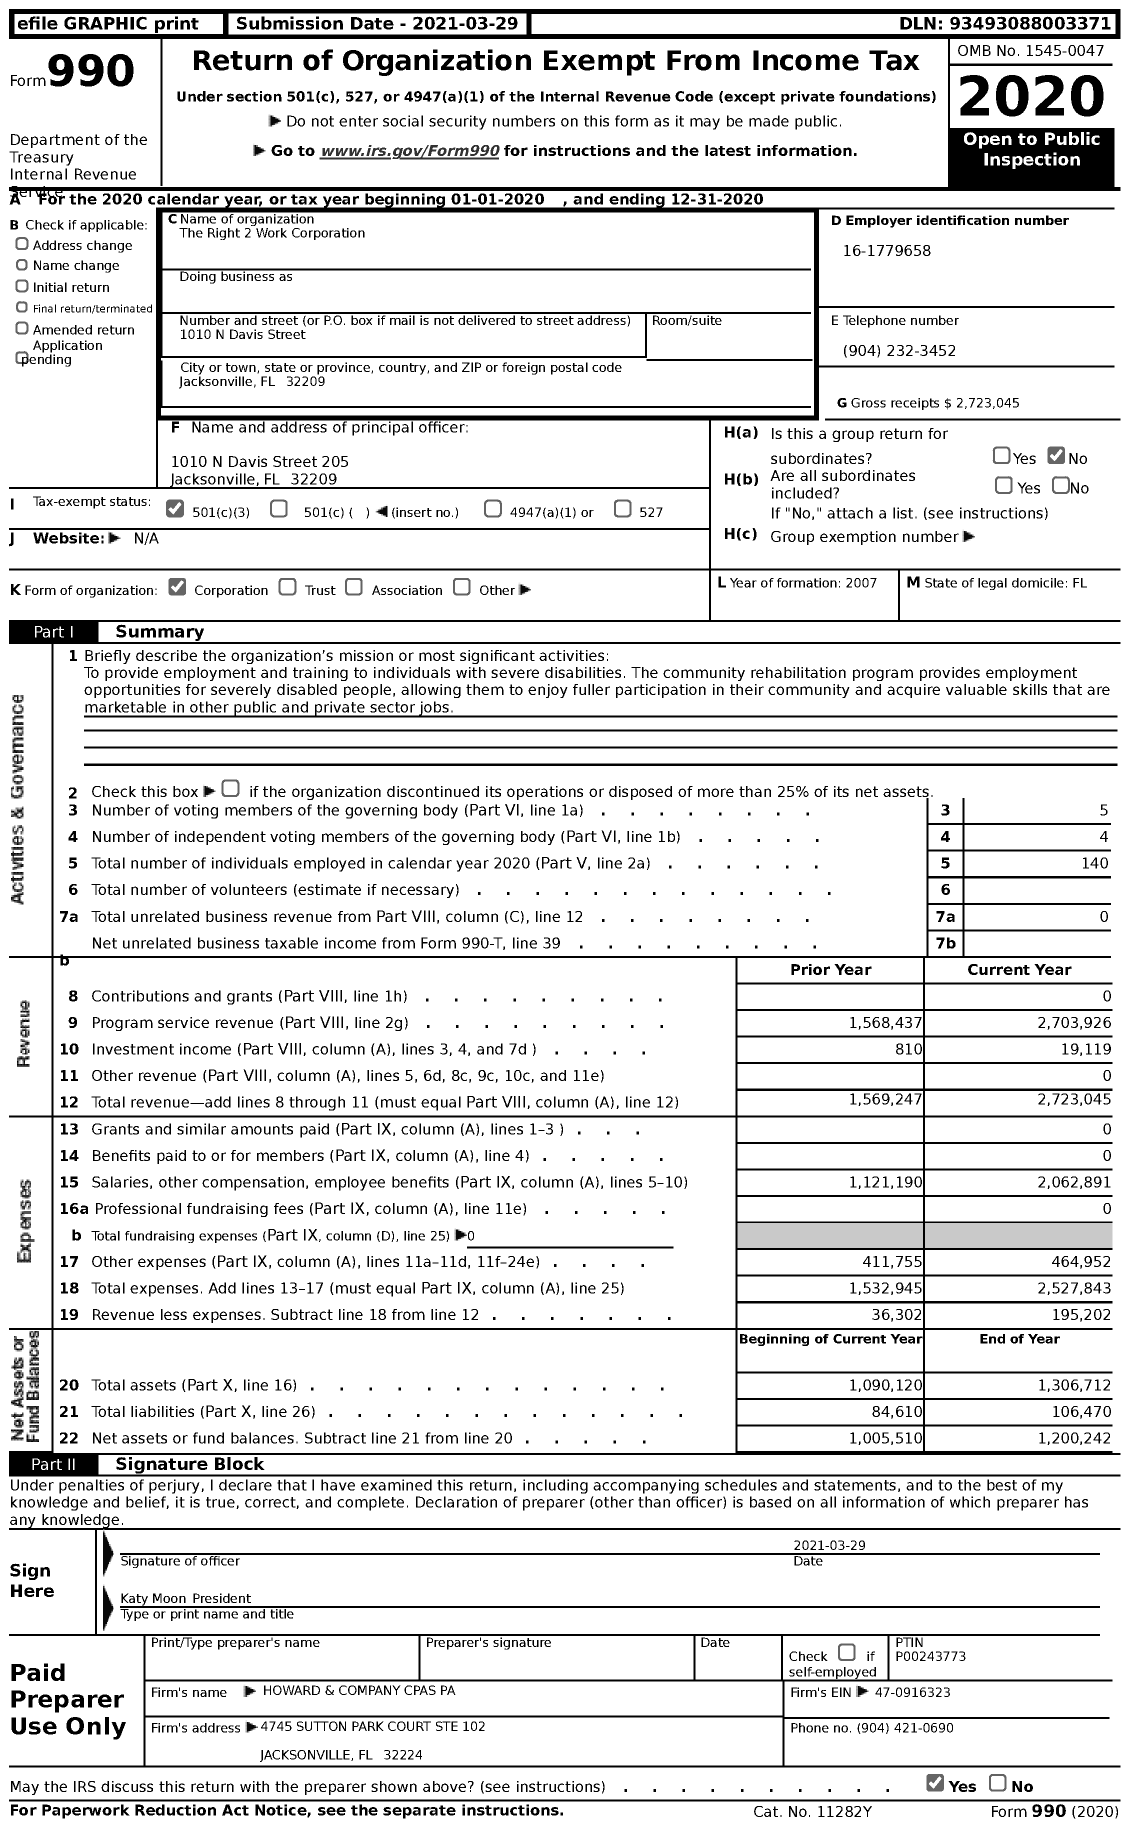 Image of first page of 2020 Form 990 for The Right 2 Work Corporation